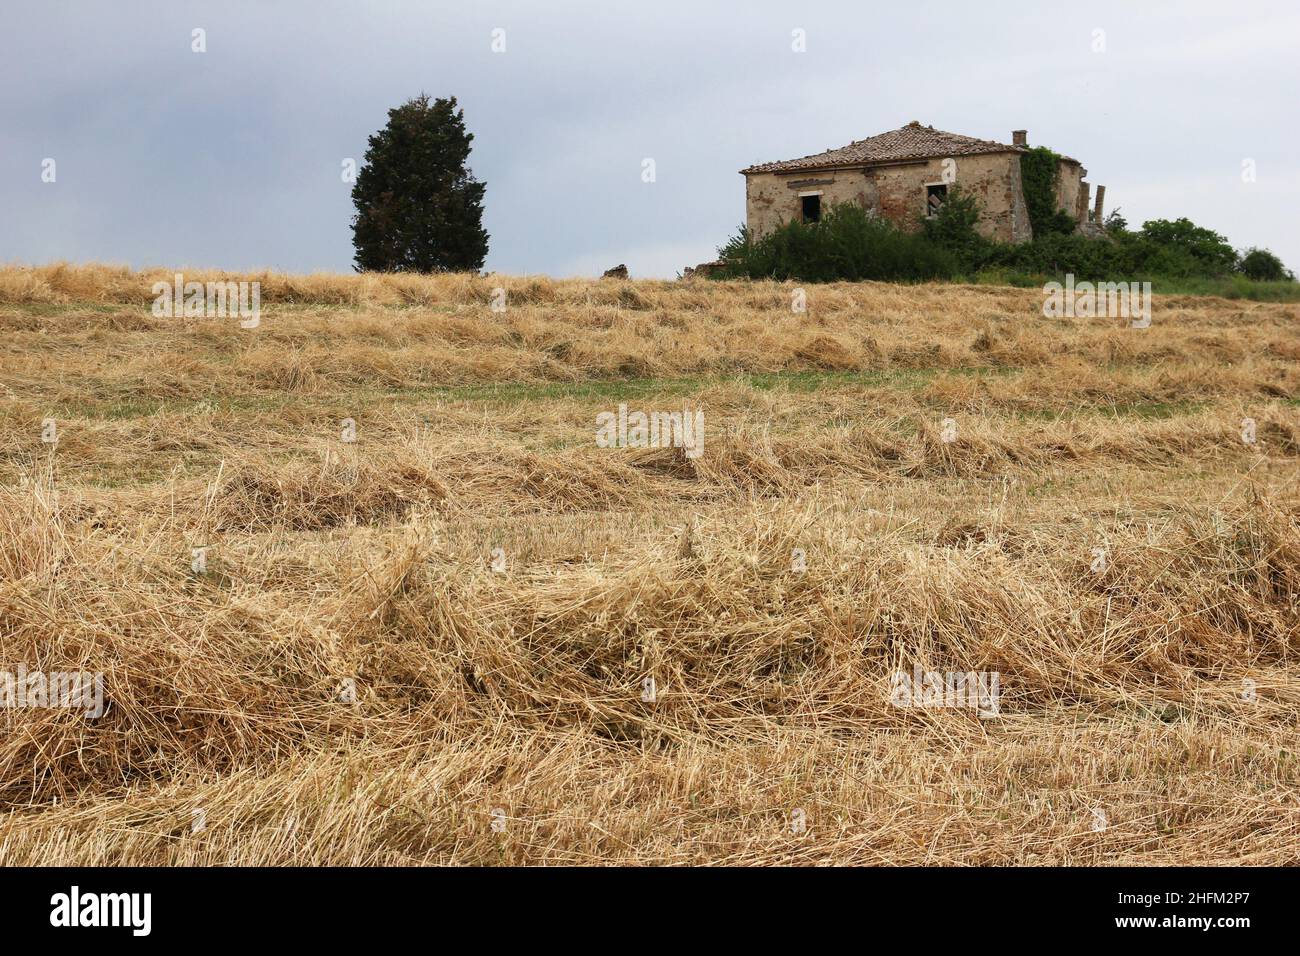 The typical old stone house, now a ruin, standing in Italy in Tuscany on the field covered by hay. Stock Photo